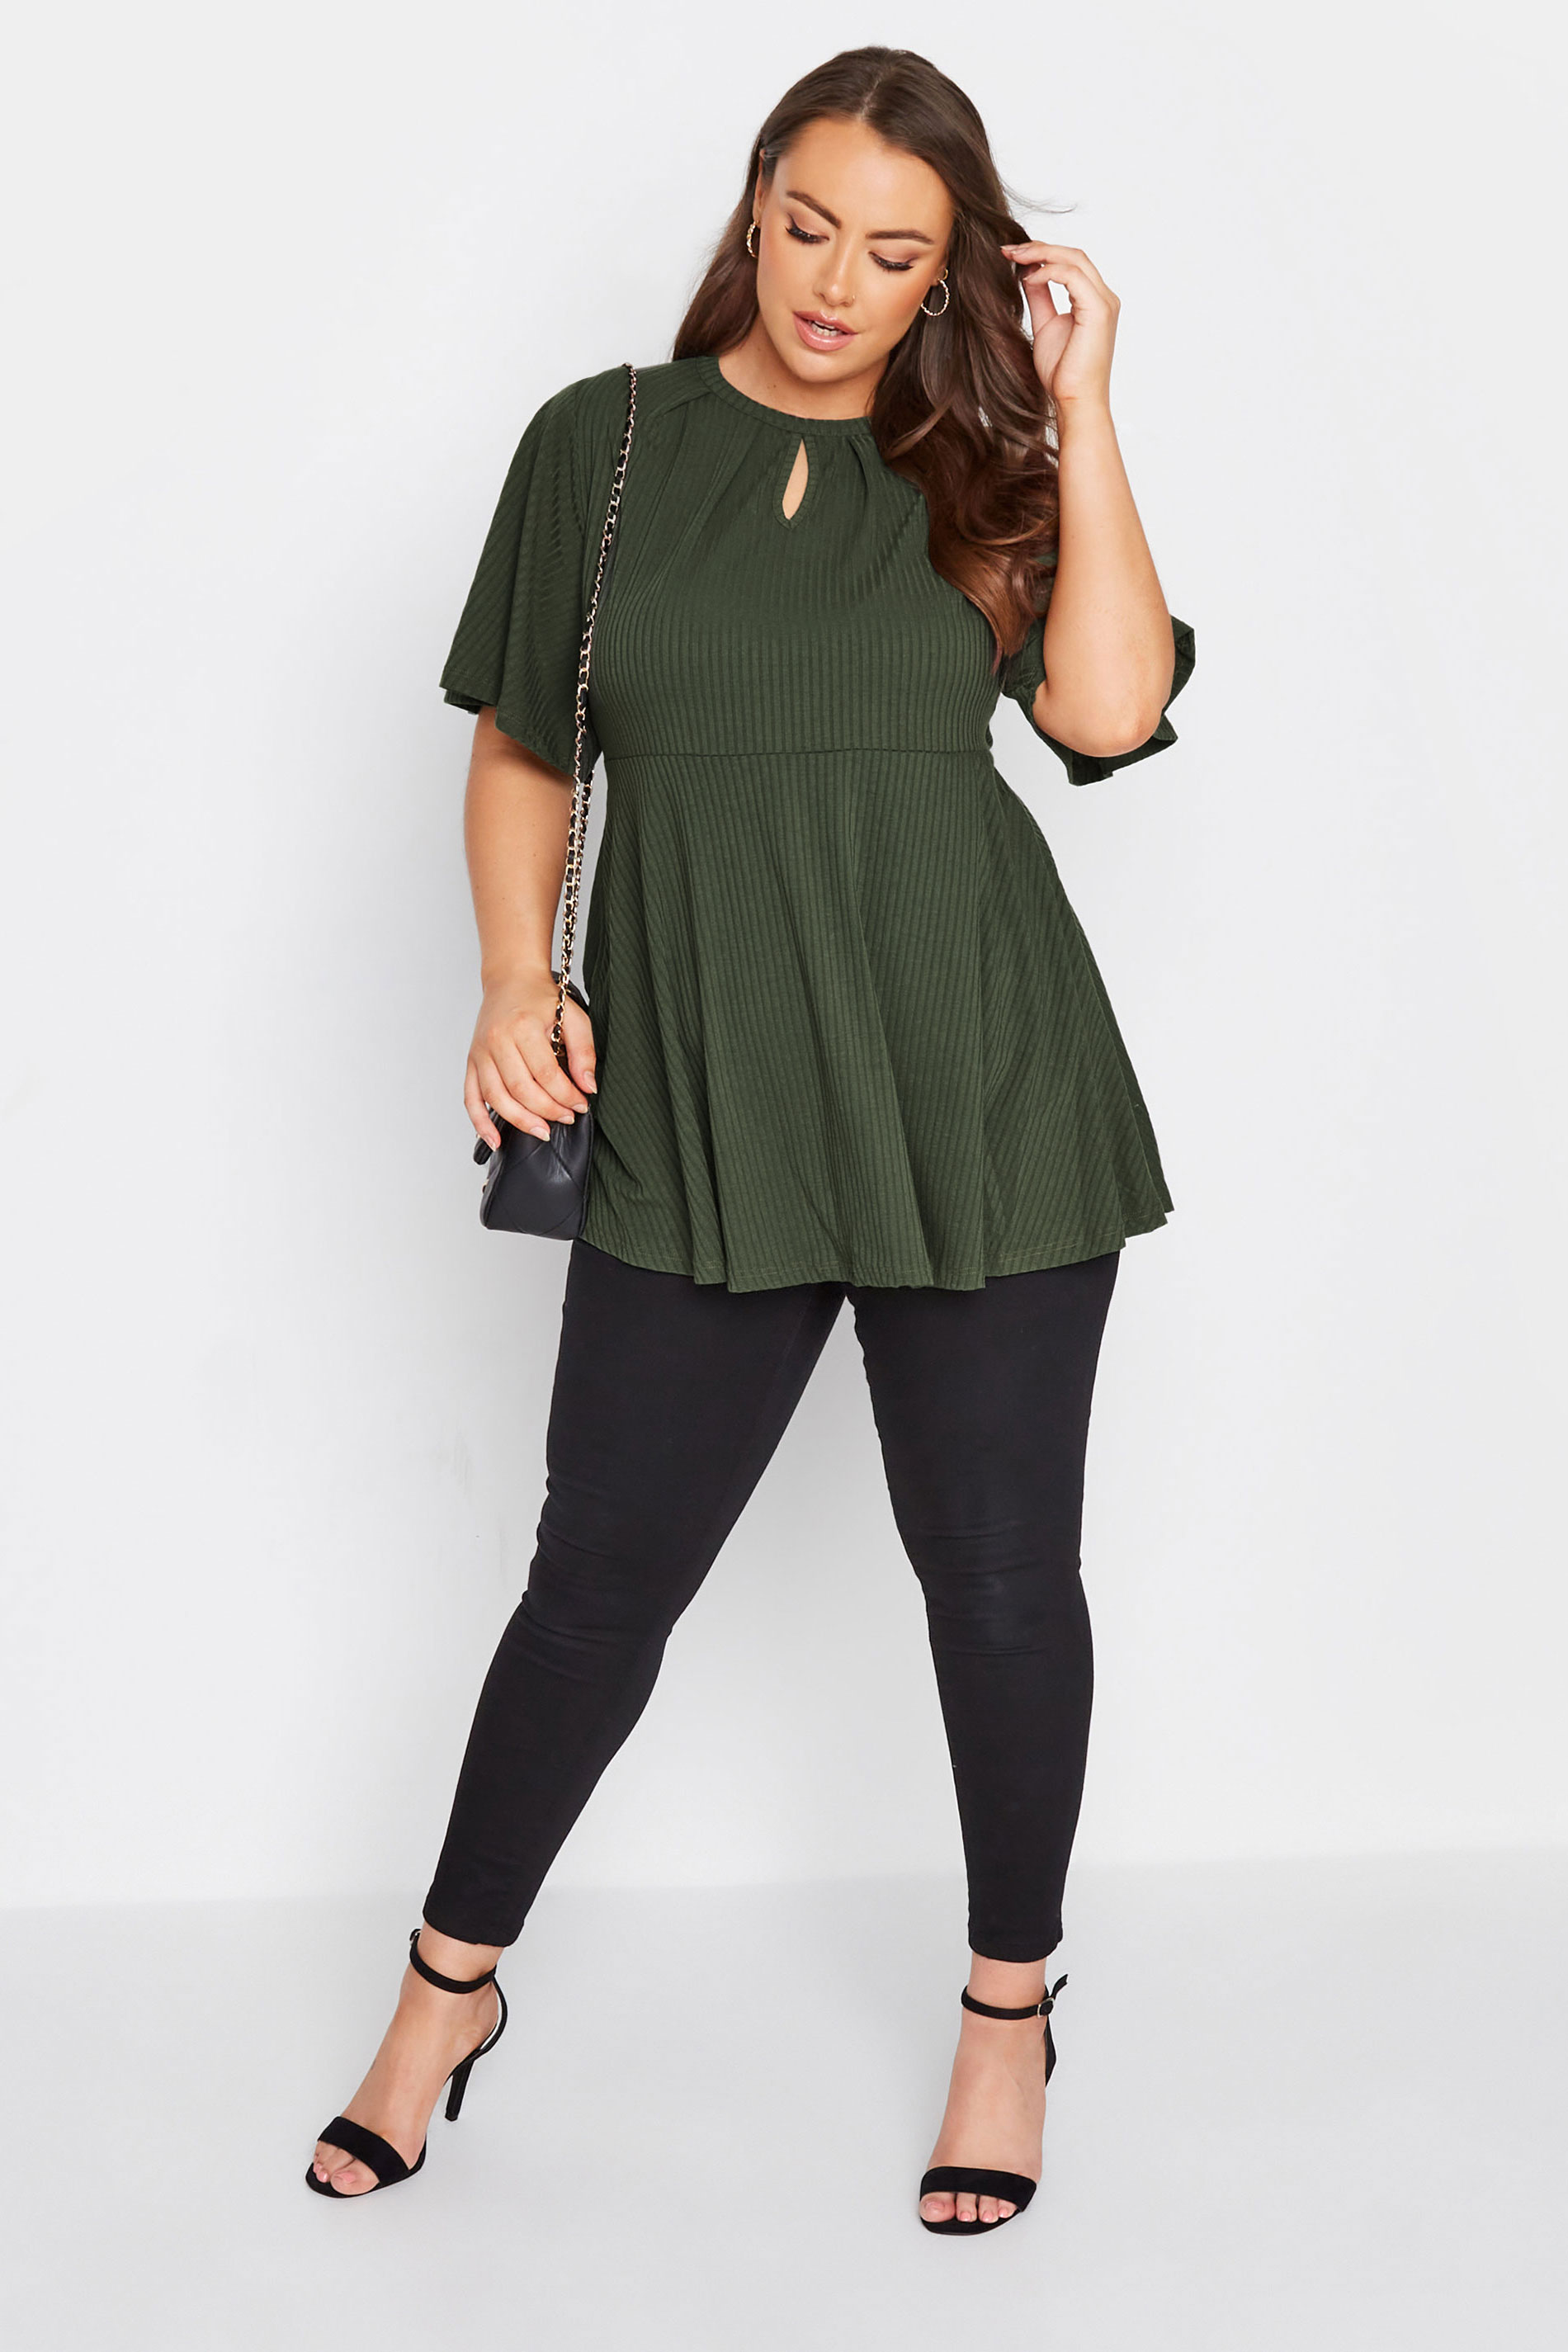 LIMITED COLLECTION Plus Size Dark Green Keyhole Ribbed Peplum Top | Yours Clothing 2